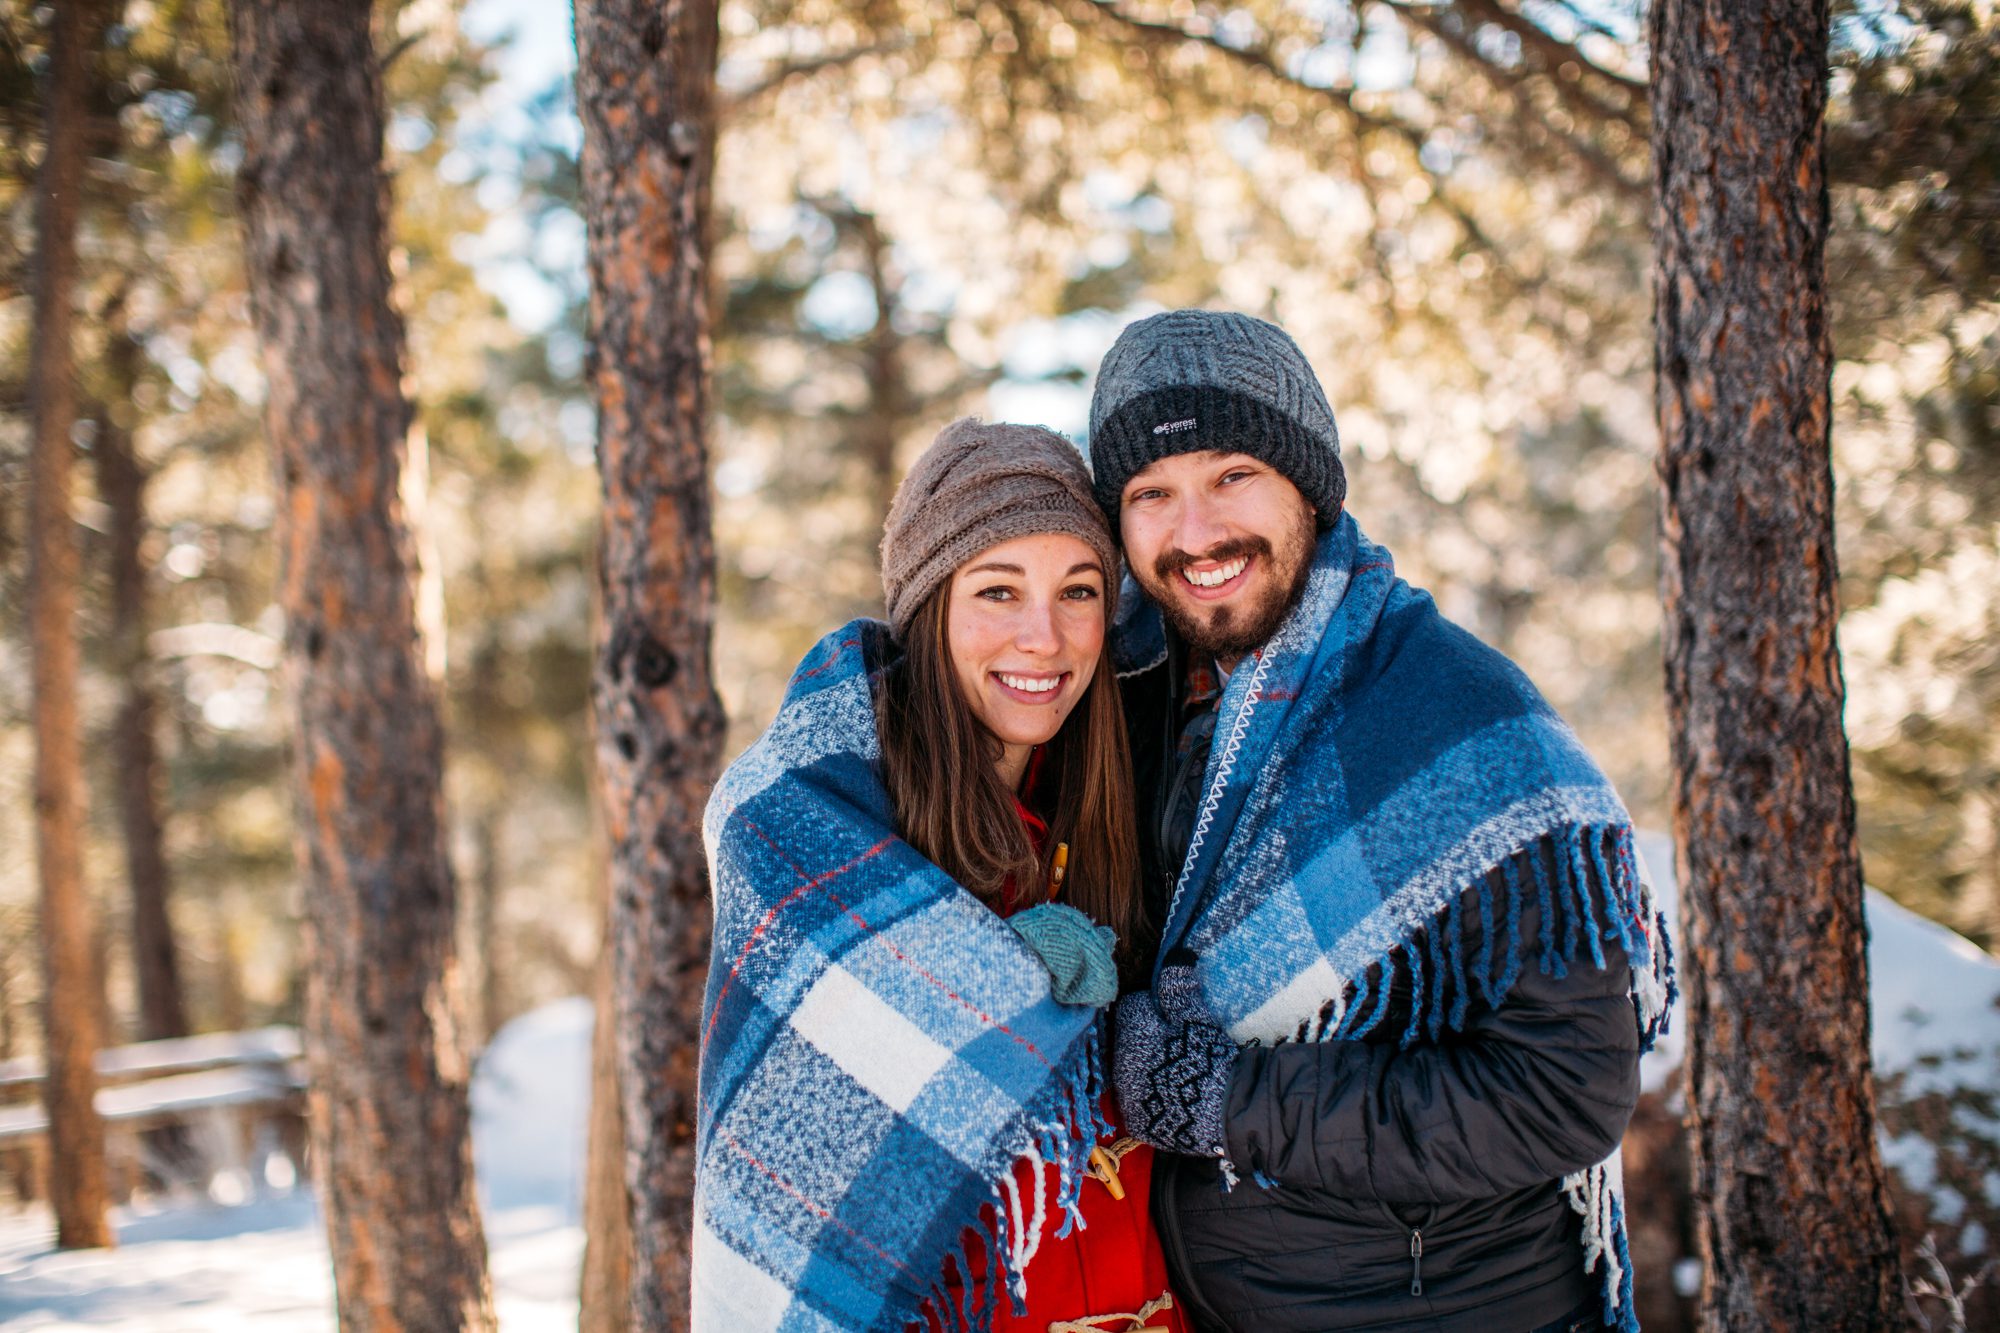 engagement photo with blanket, lost gulch overlook, lost gulch overlook engagement, lost gulch overlook boulder, winter engagement session, winter engagement photos, cute engagement photos, snowy engagement photos, colorado engagement, colorado engagement photographer, denver engagement photographer, cold weather engagement photos, couples photo posing, engagement photo posing